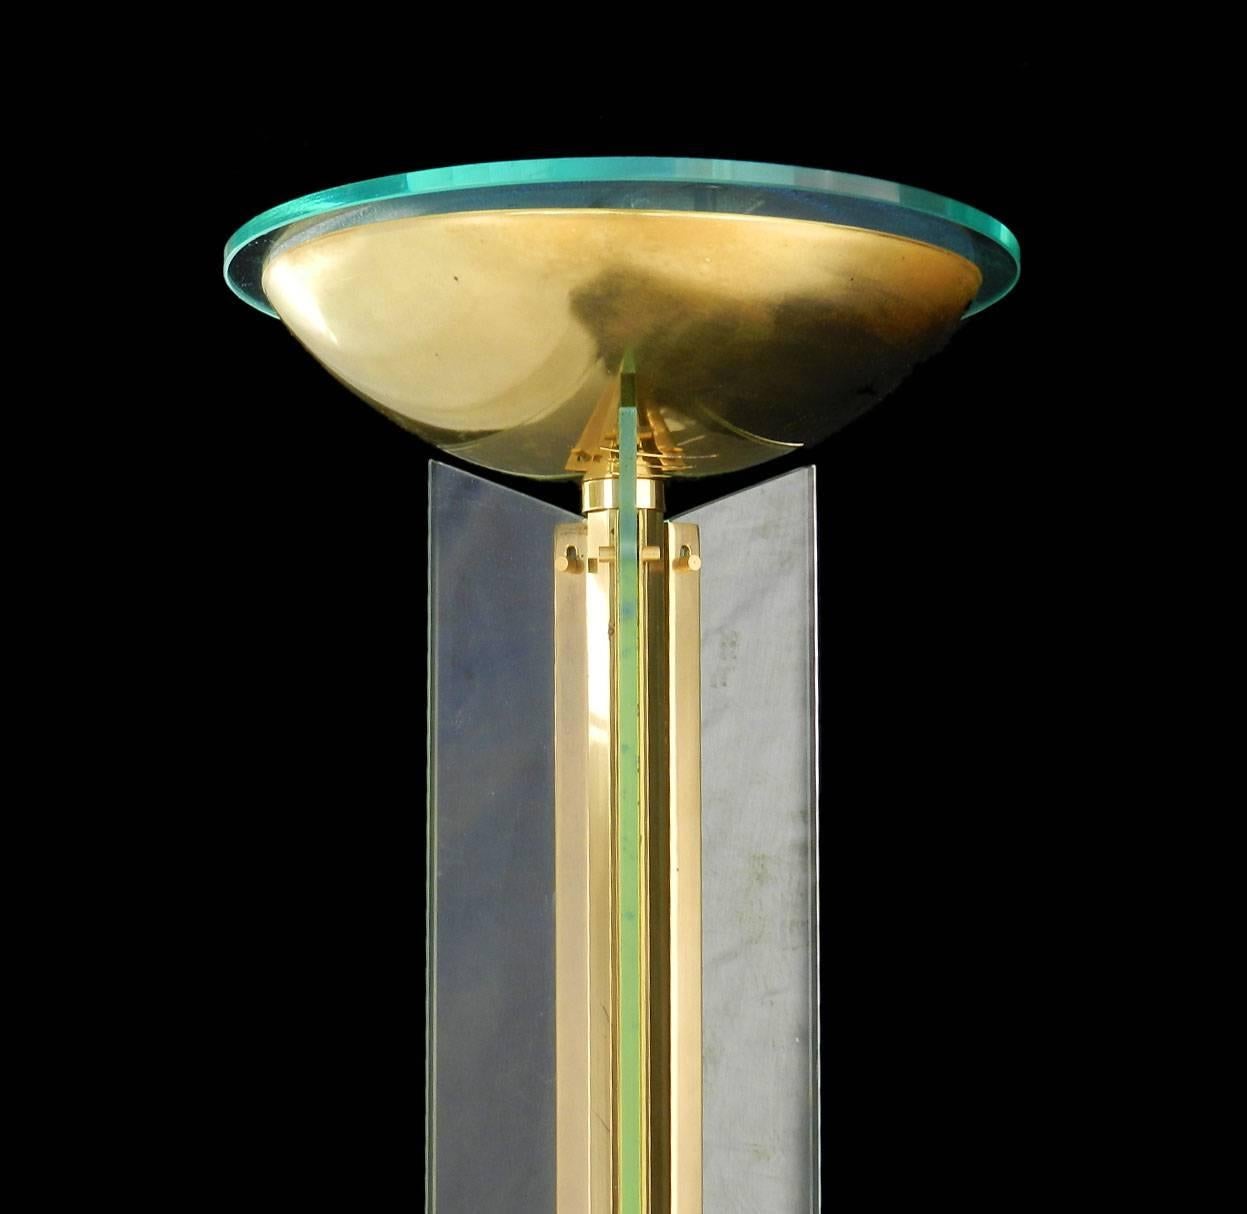 Stylish good quality designer bronze nickel and glass floor lamp uplighter torchère, 20th century Art Deco Revival
Style of Jean Perzel the 1930s German / French lighting designer
Original plate glass
Good Patina to nickel bronzed base
Uplighter